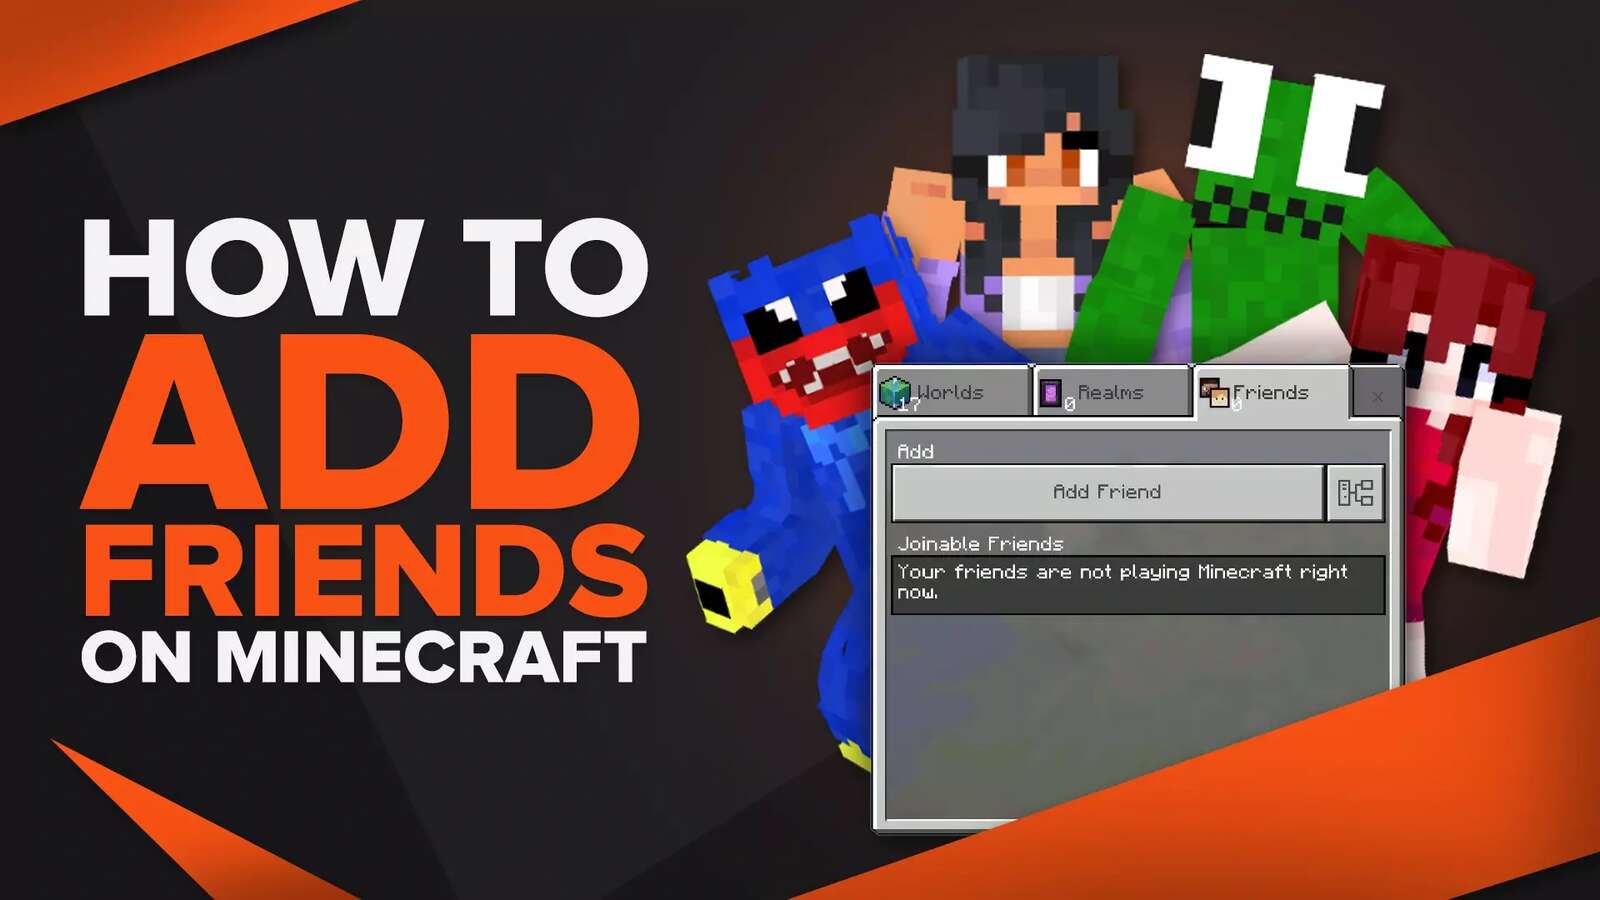 How To Add Friends on Minecraft [Step-By-Step]